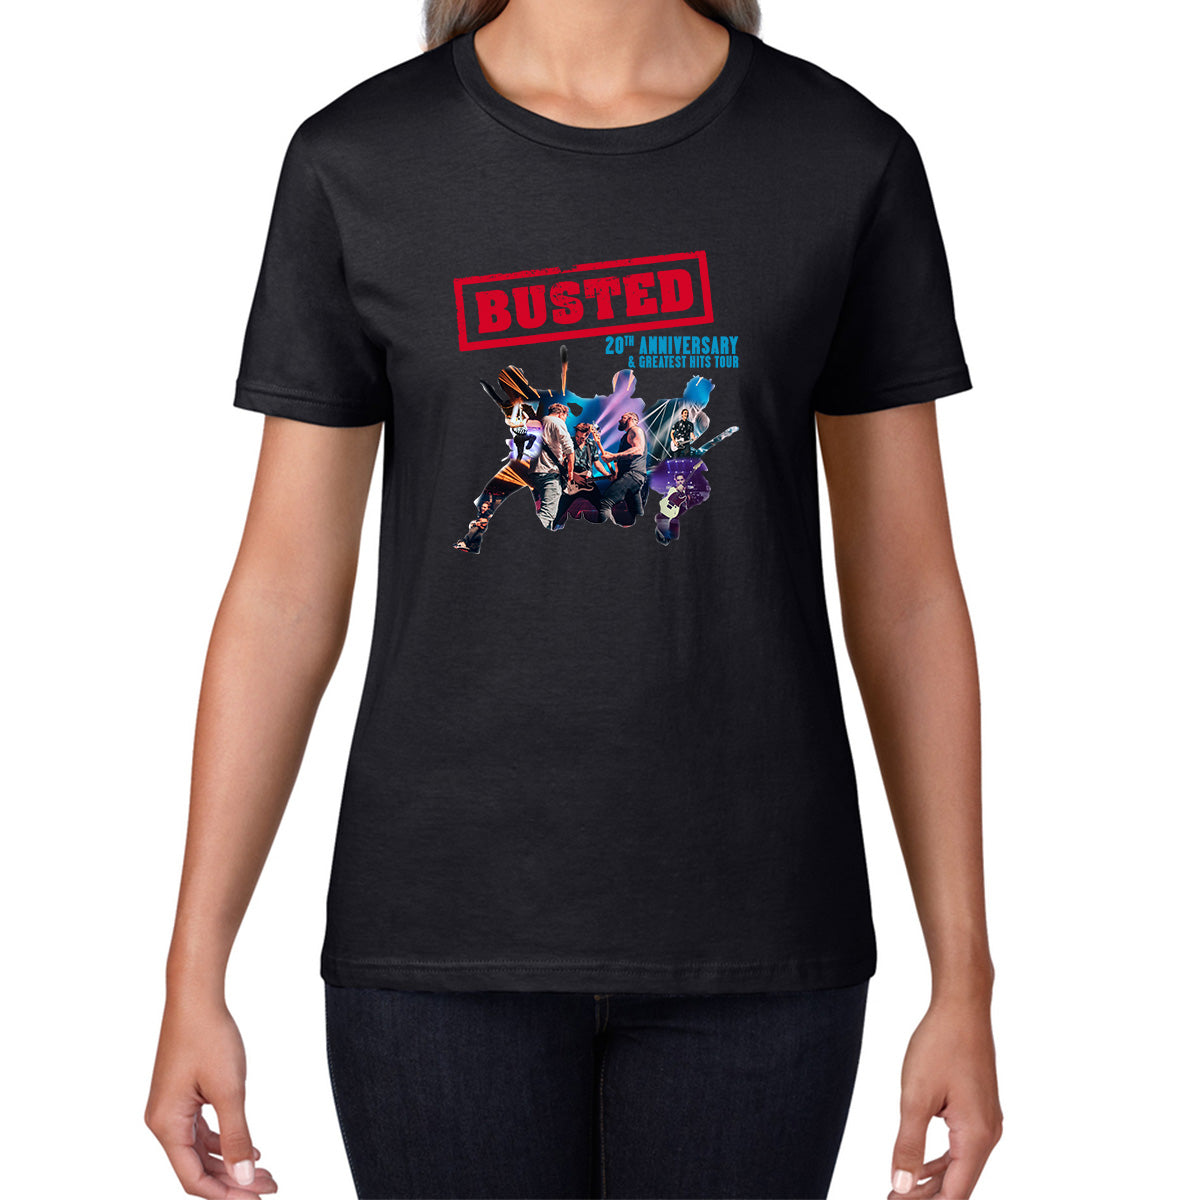 Busted 20th Anniversary & Greatest Hits Tour Busted Singers Pop Punk Music Band Womens Tee Top